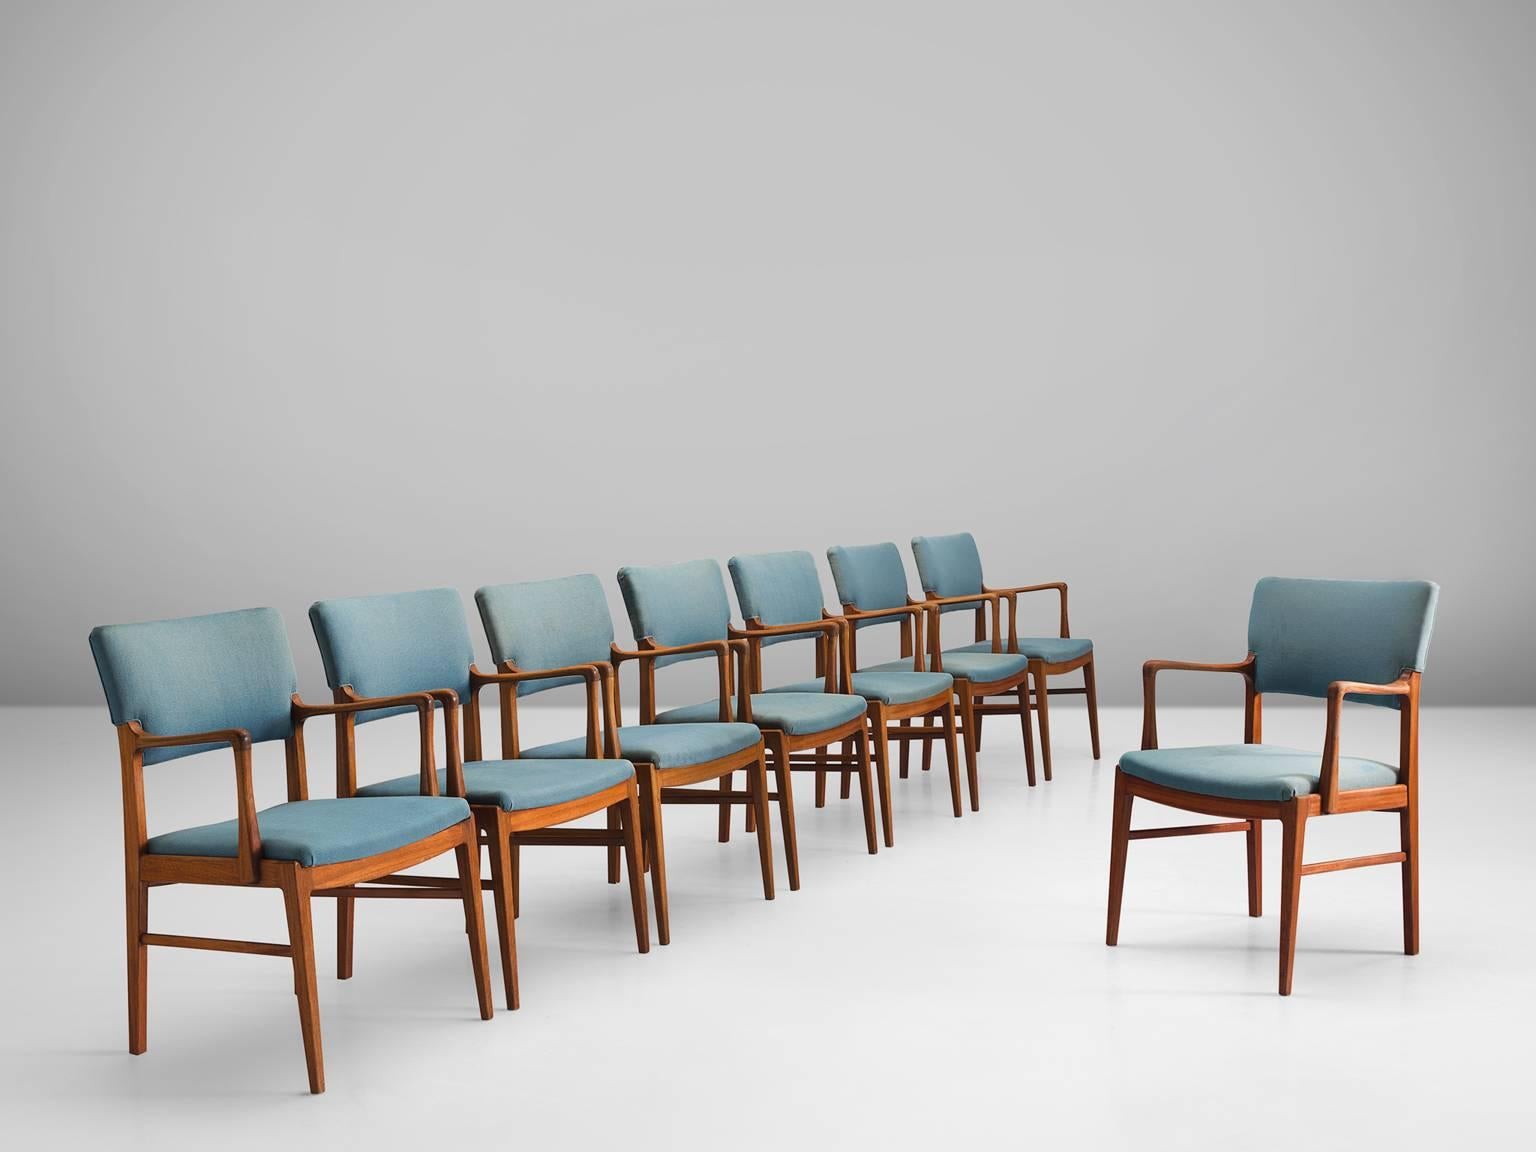 Set of eight armchairs, teak and turquoise fabric, Scandinavia, 1950s. 

These elegant teak dining chairs with armrests are both stately and modest. These Scandinavian chairs have a teak frame with a beautiful visible grain. Nicely curved armrests